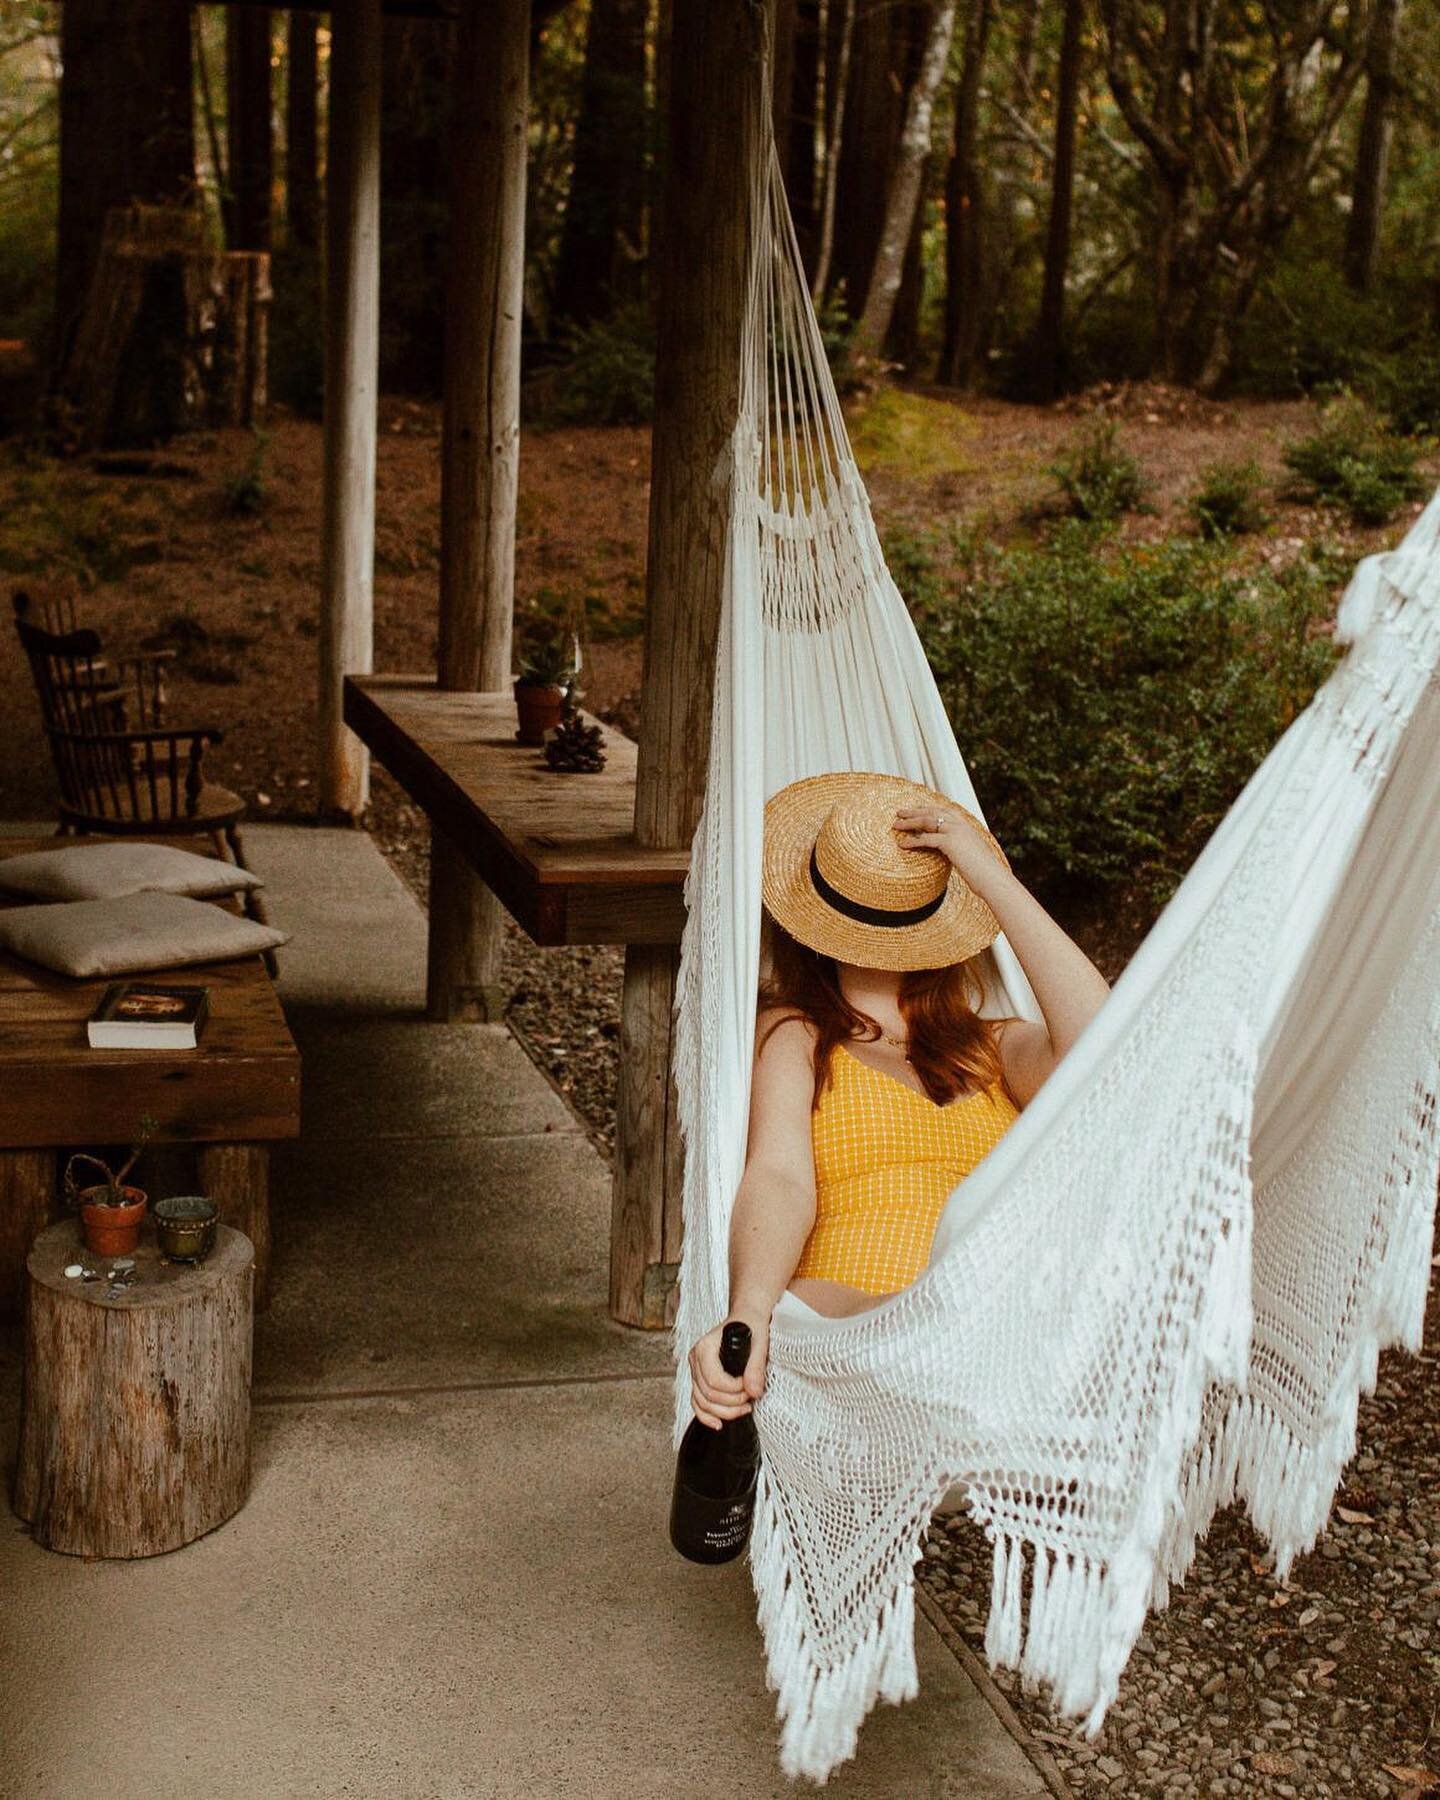 Our guest relaxing at the #watertowerretreat 

Photo by @thewhimsysoul